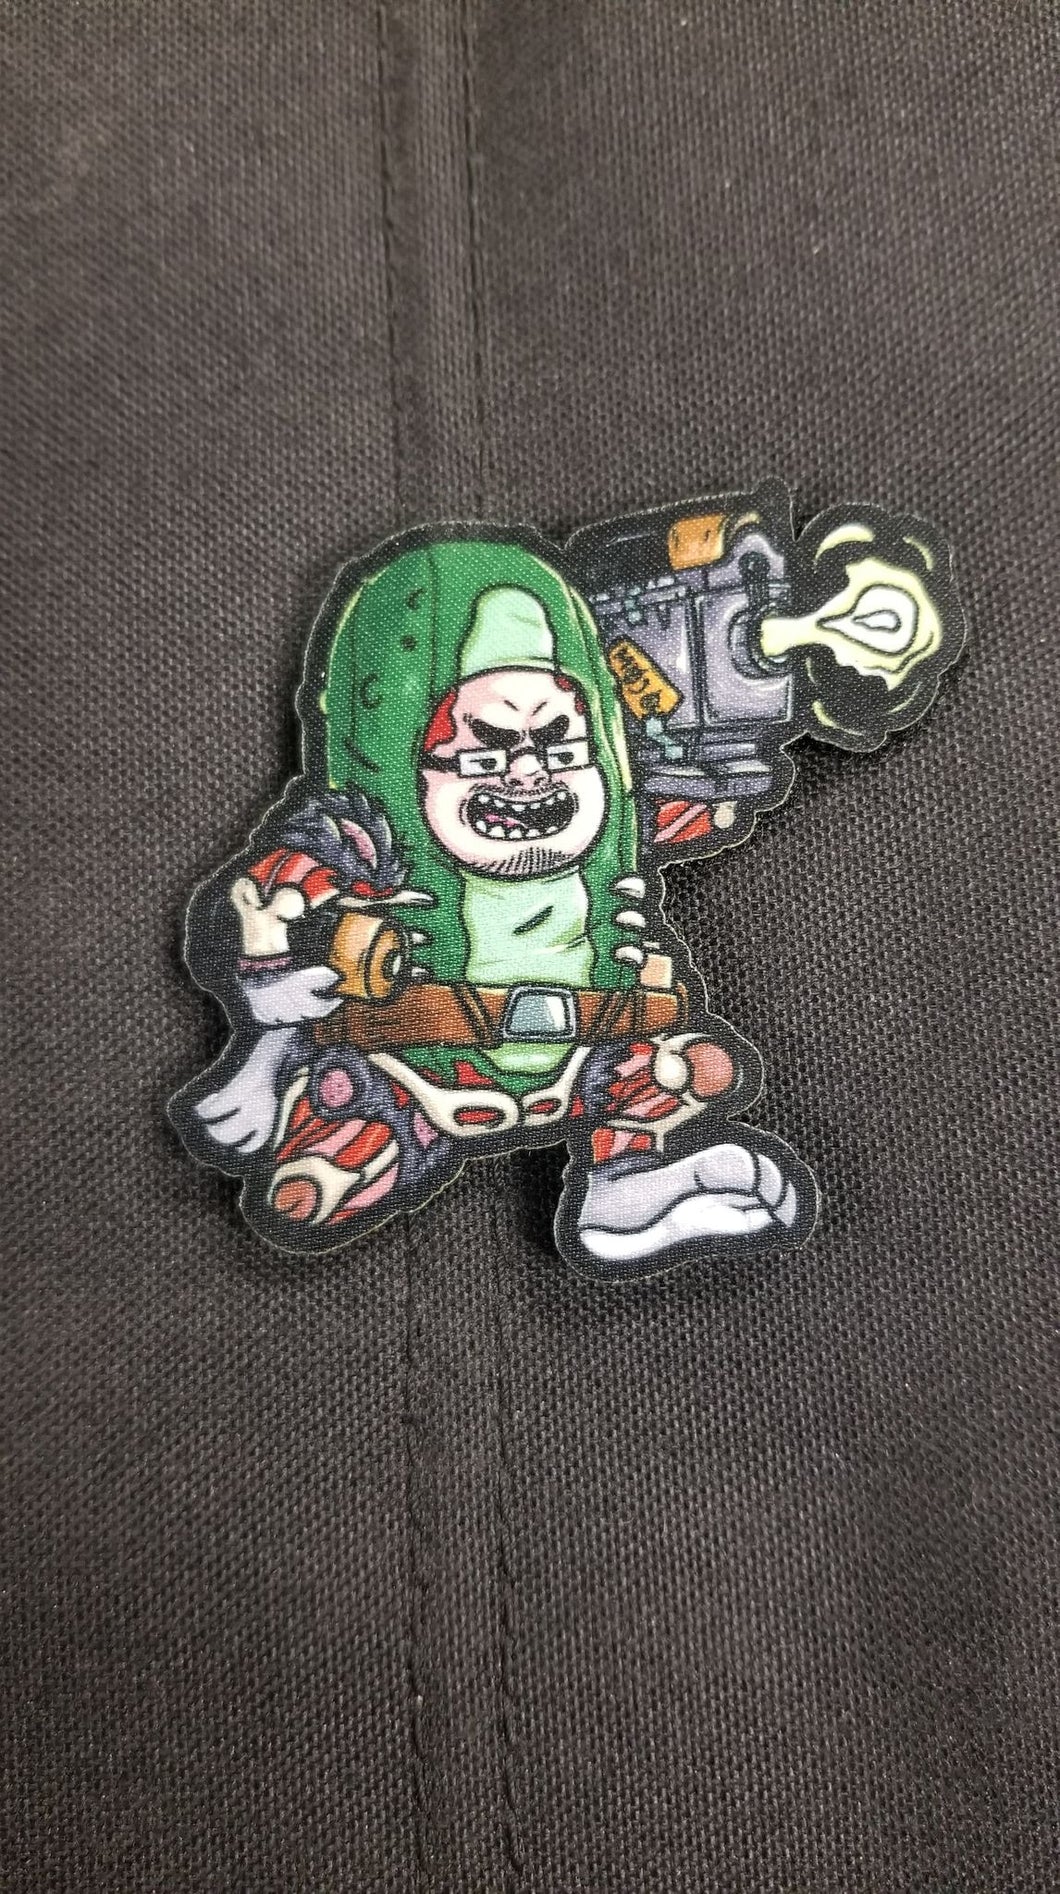 Pickle Dave Cosplay patch